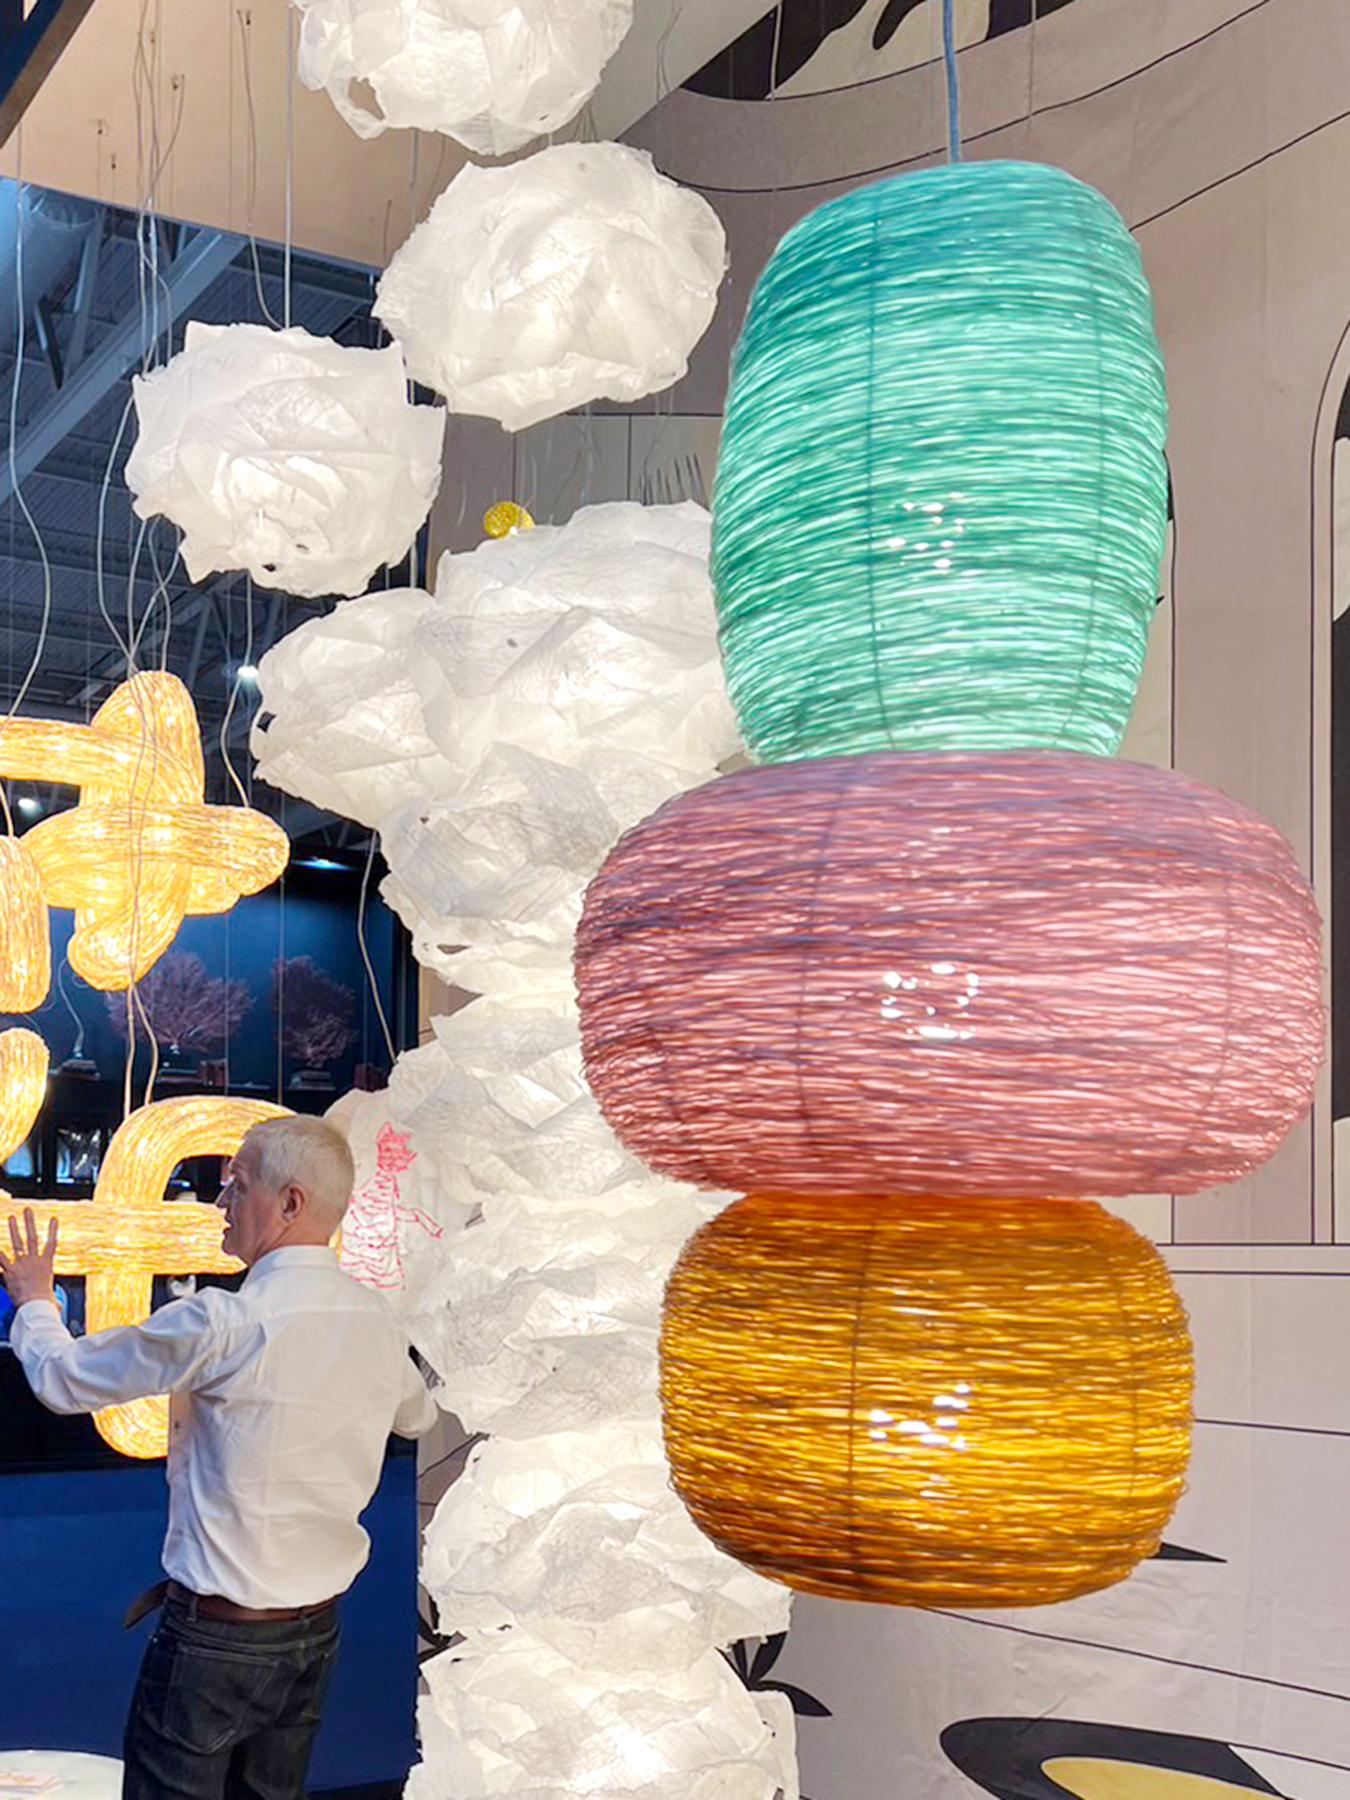 Each Shelter pendant is created with the elemental and universal form of a loosely woven nest like home, that is then incarnated by light inside, diffused through many metres of lateral recycled polypropylene. 

The Shelter pendant material has been